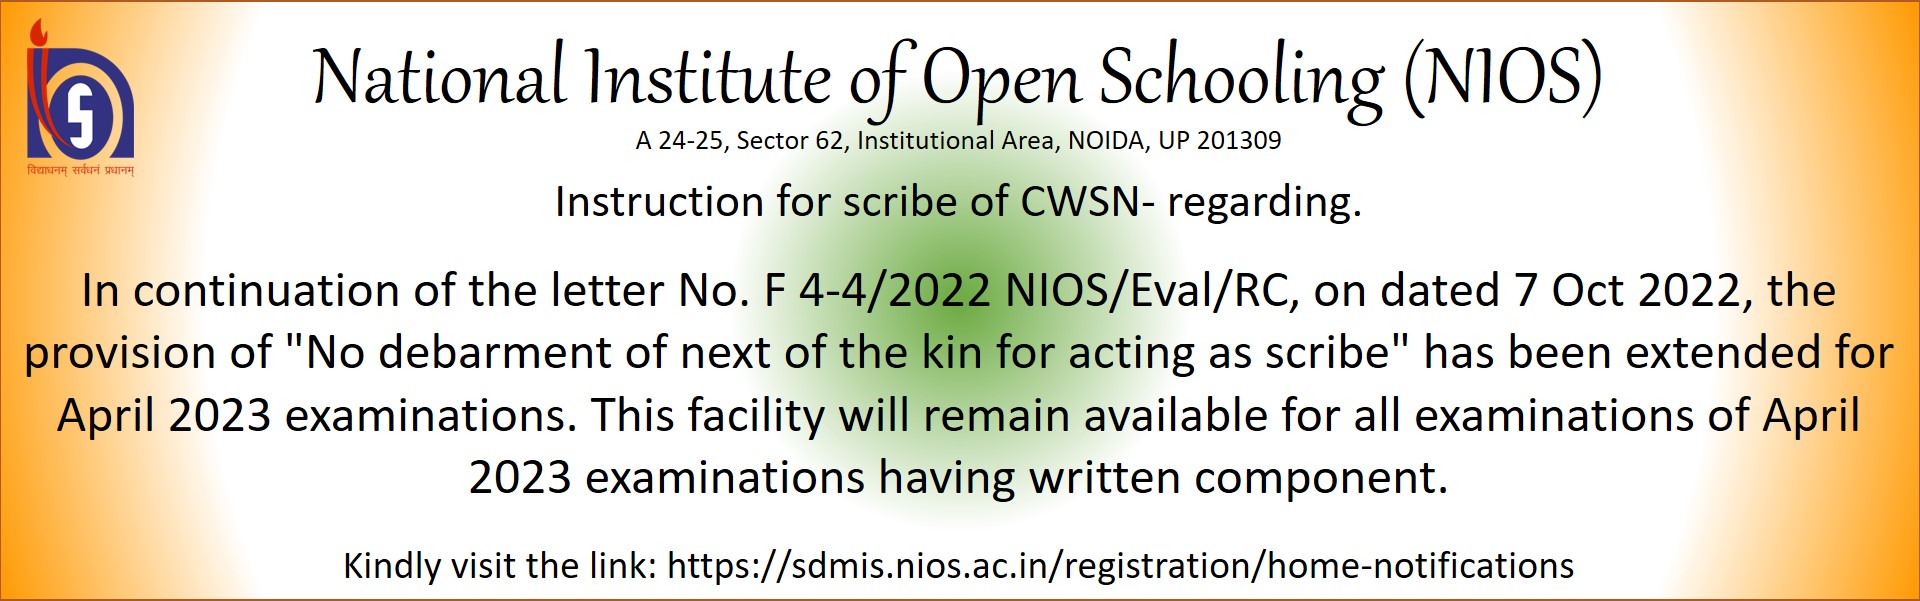 nios assignment submission online